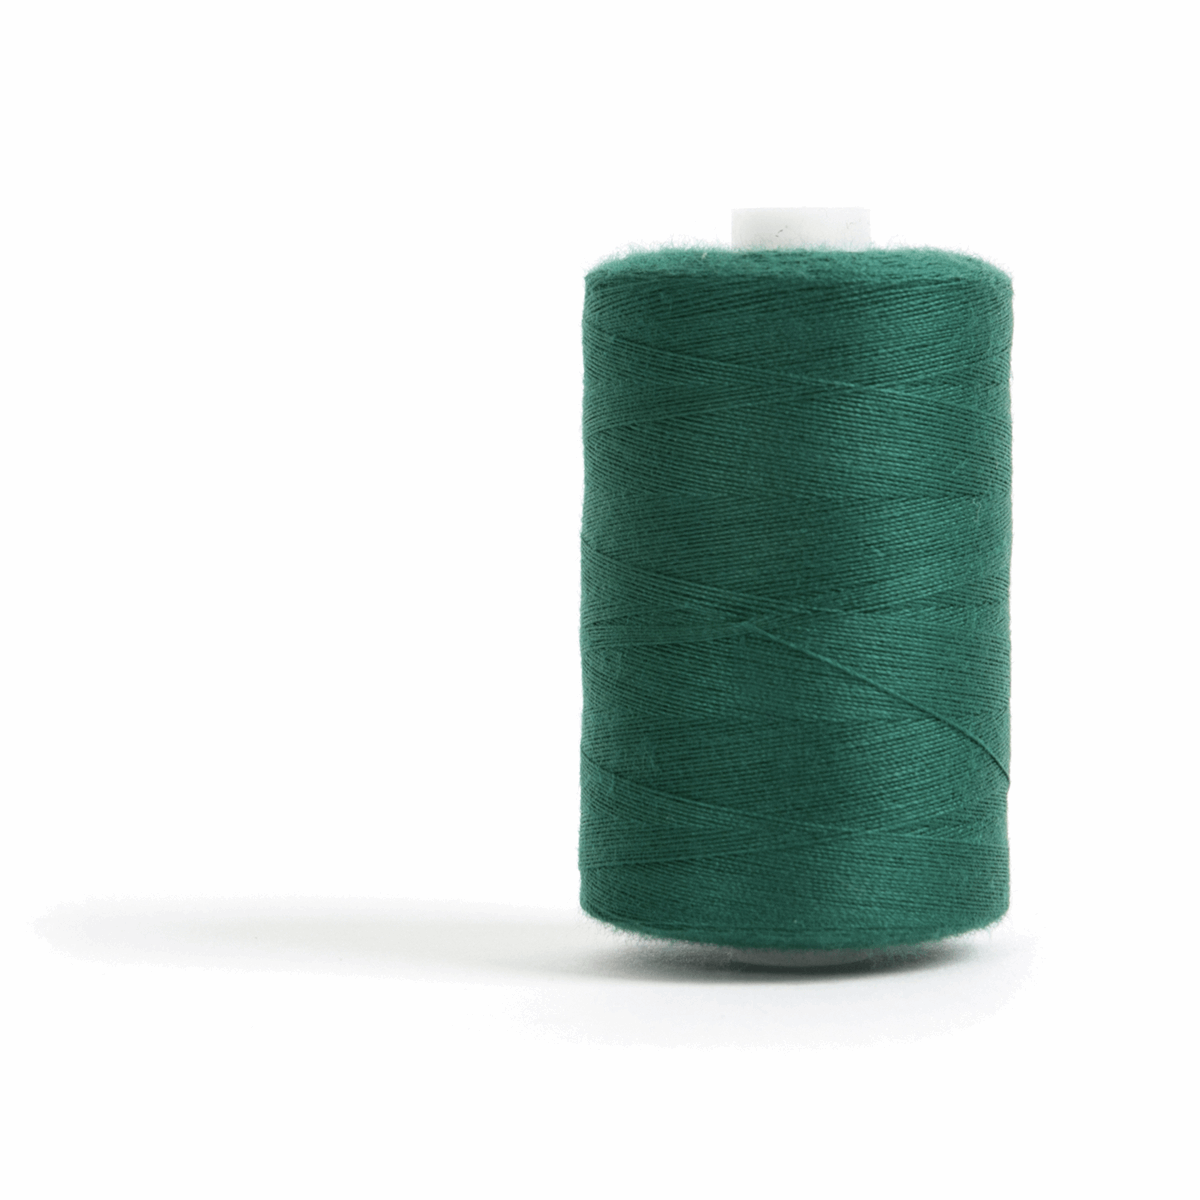 Thread 1000m Extra Large - Bottle Green - for Sewing and Overlocking